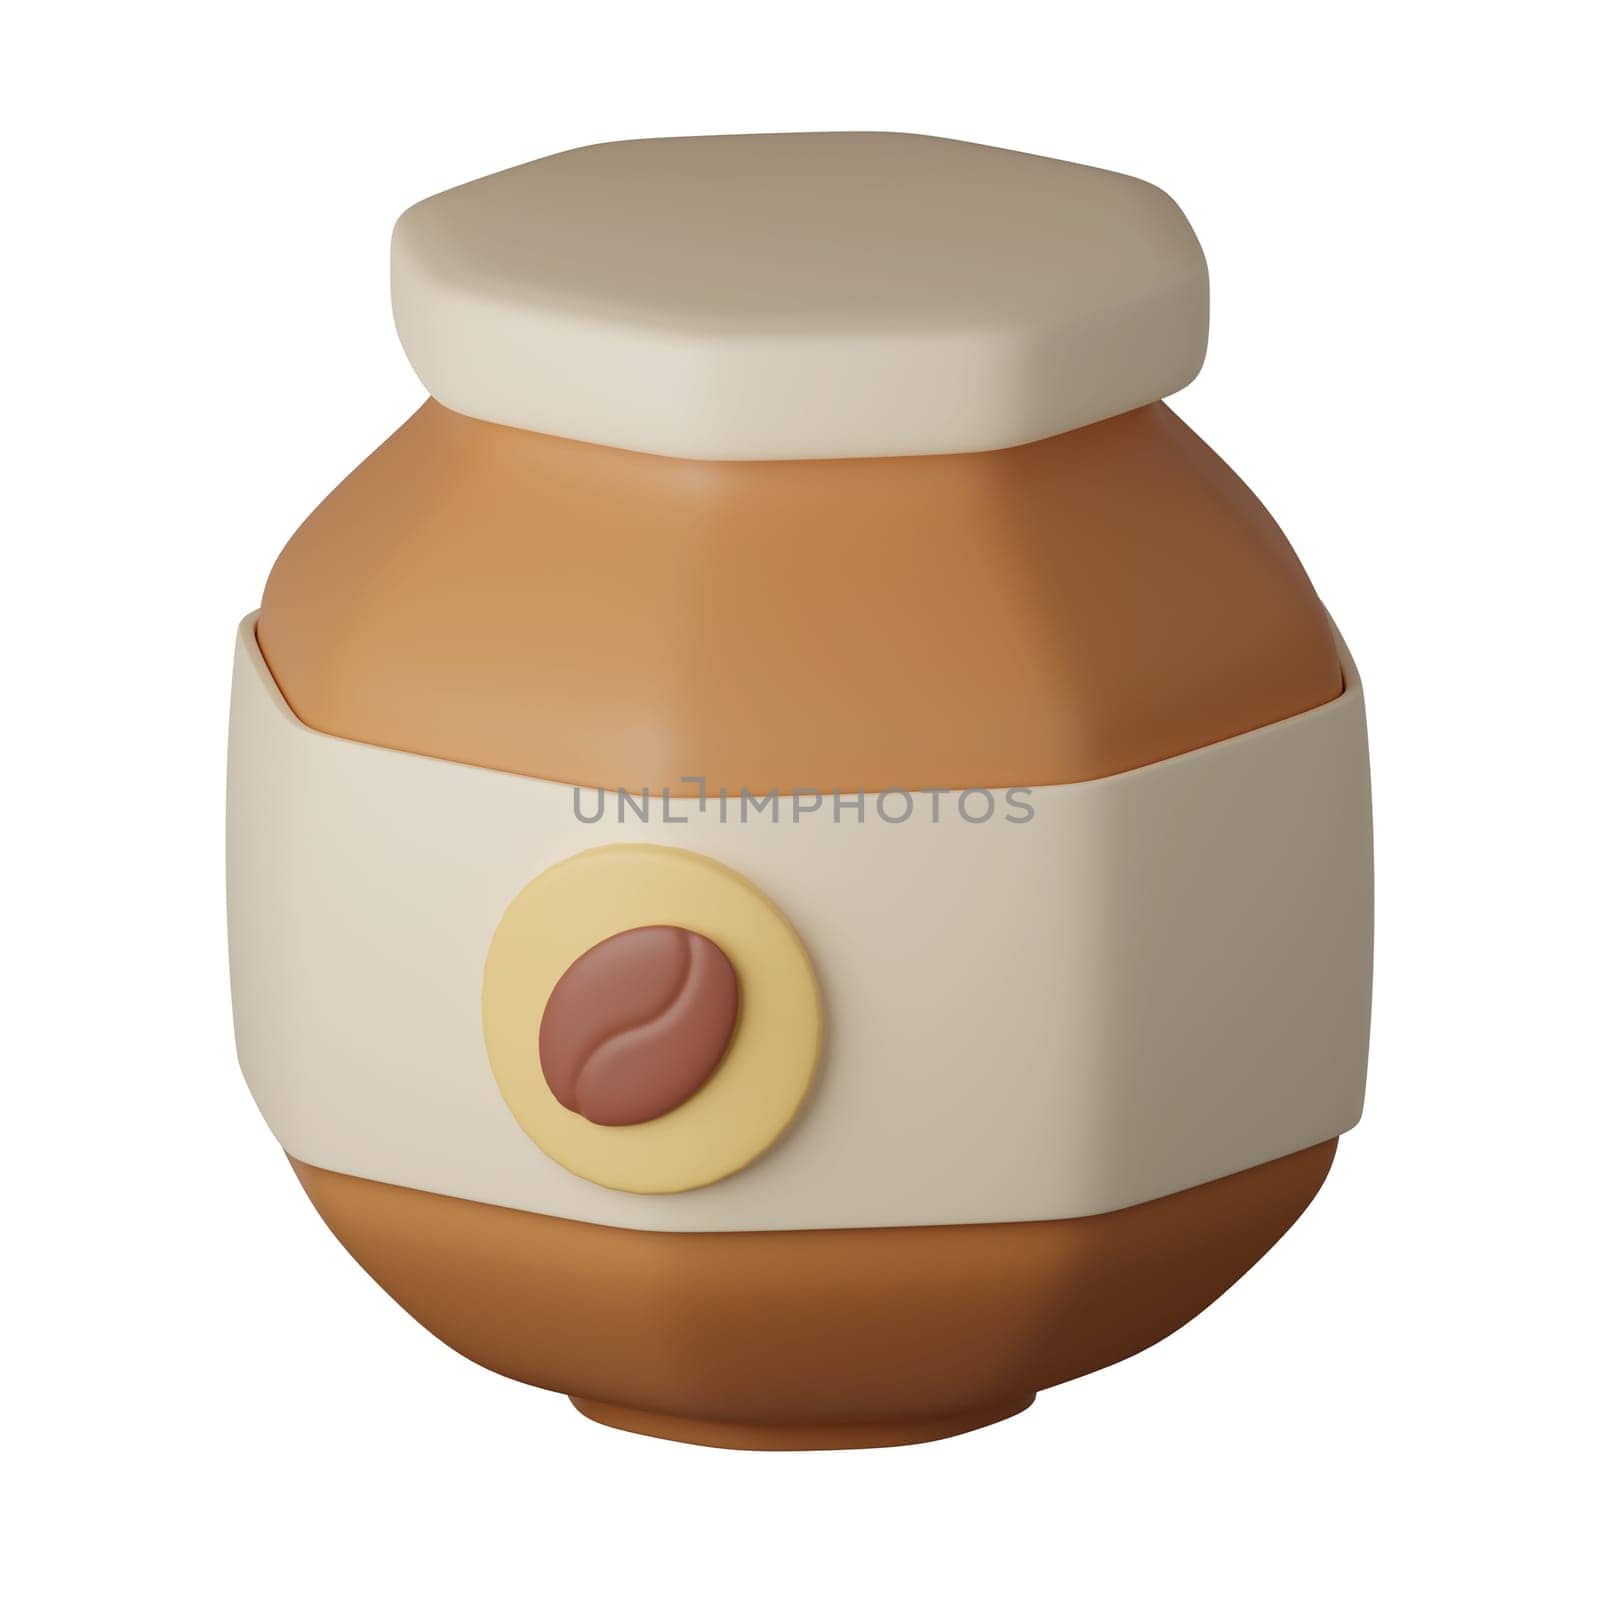 A bottle of Ground coffee Cartoon Style Isolated on a White Background. 3d illustration by meepiangraphic